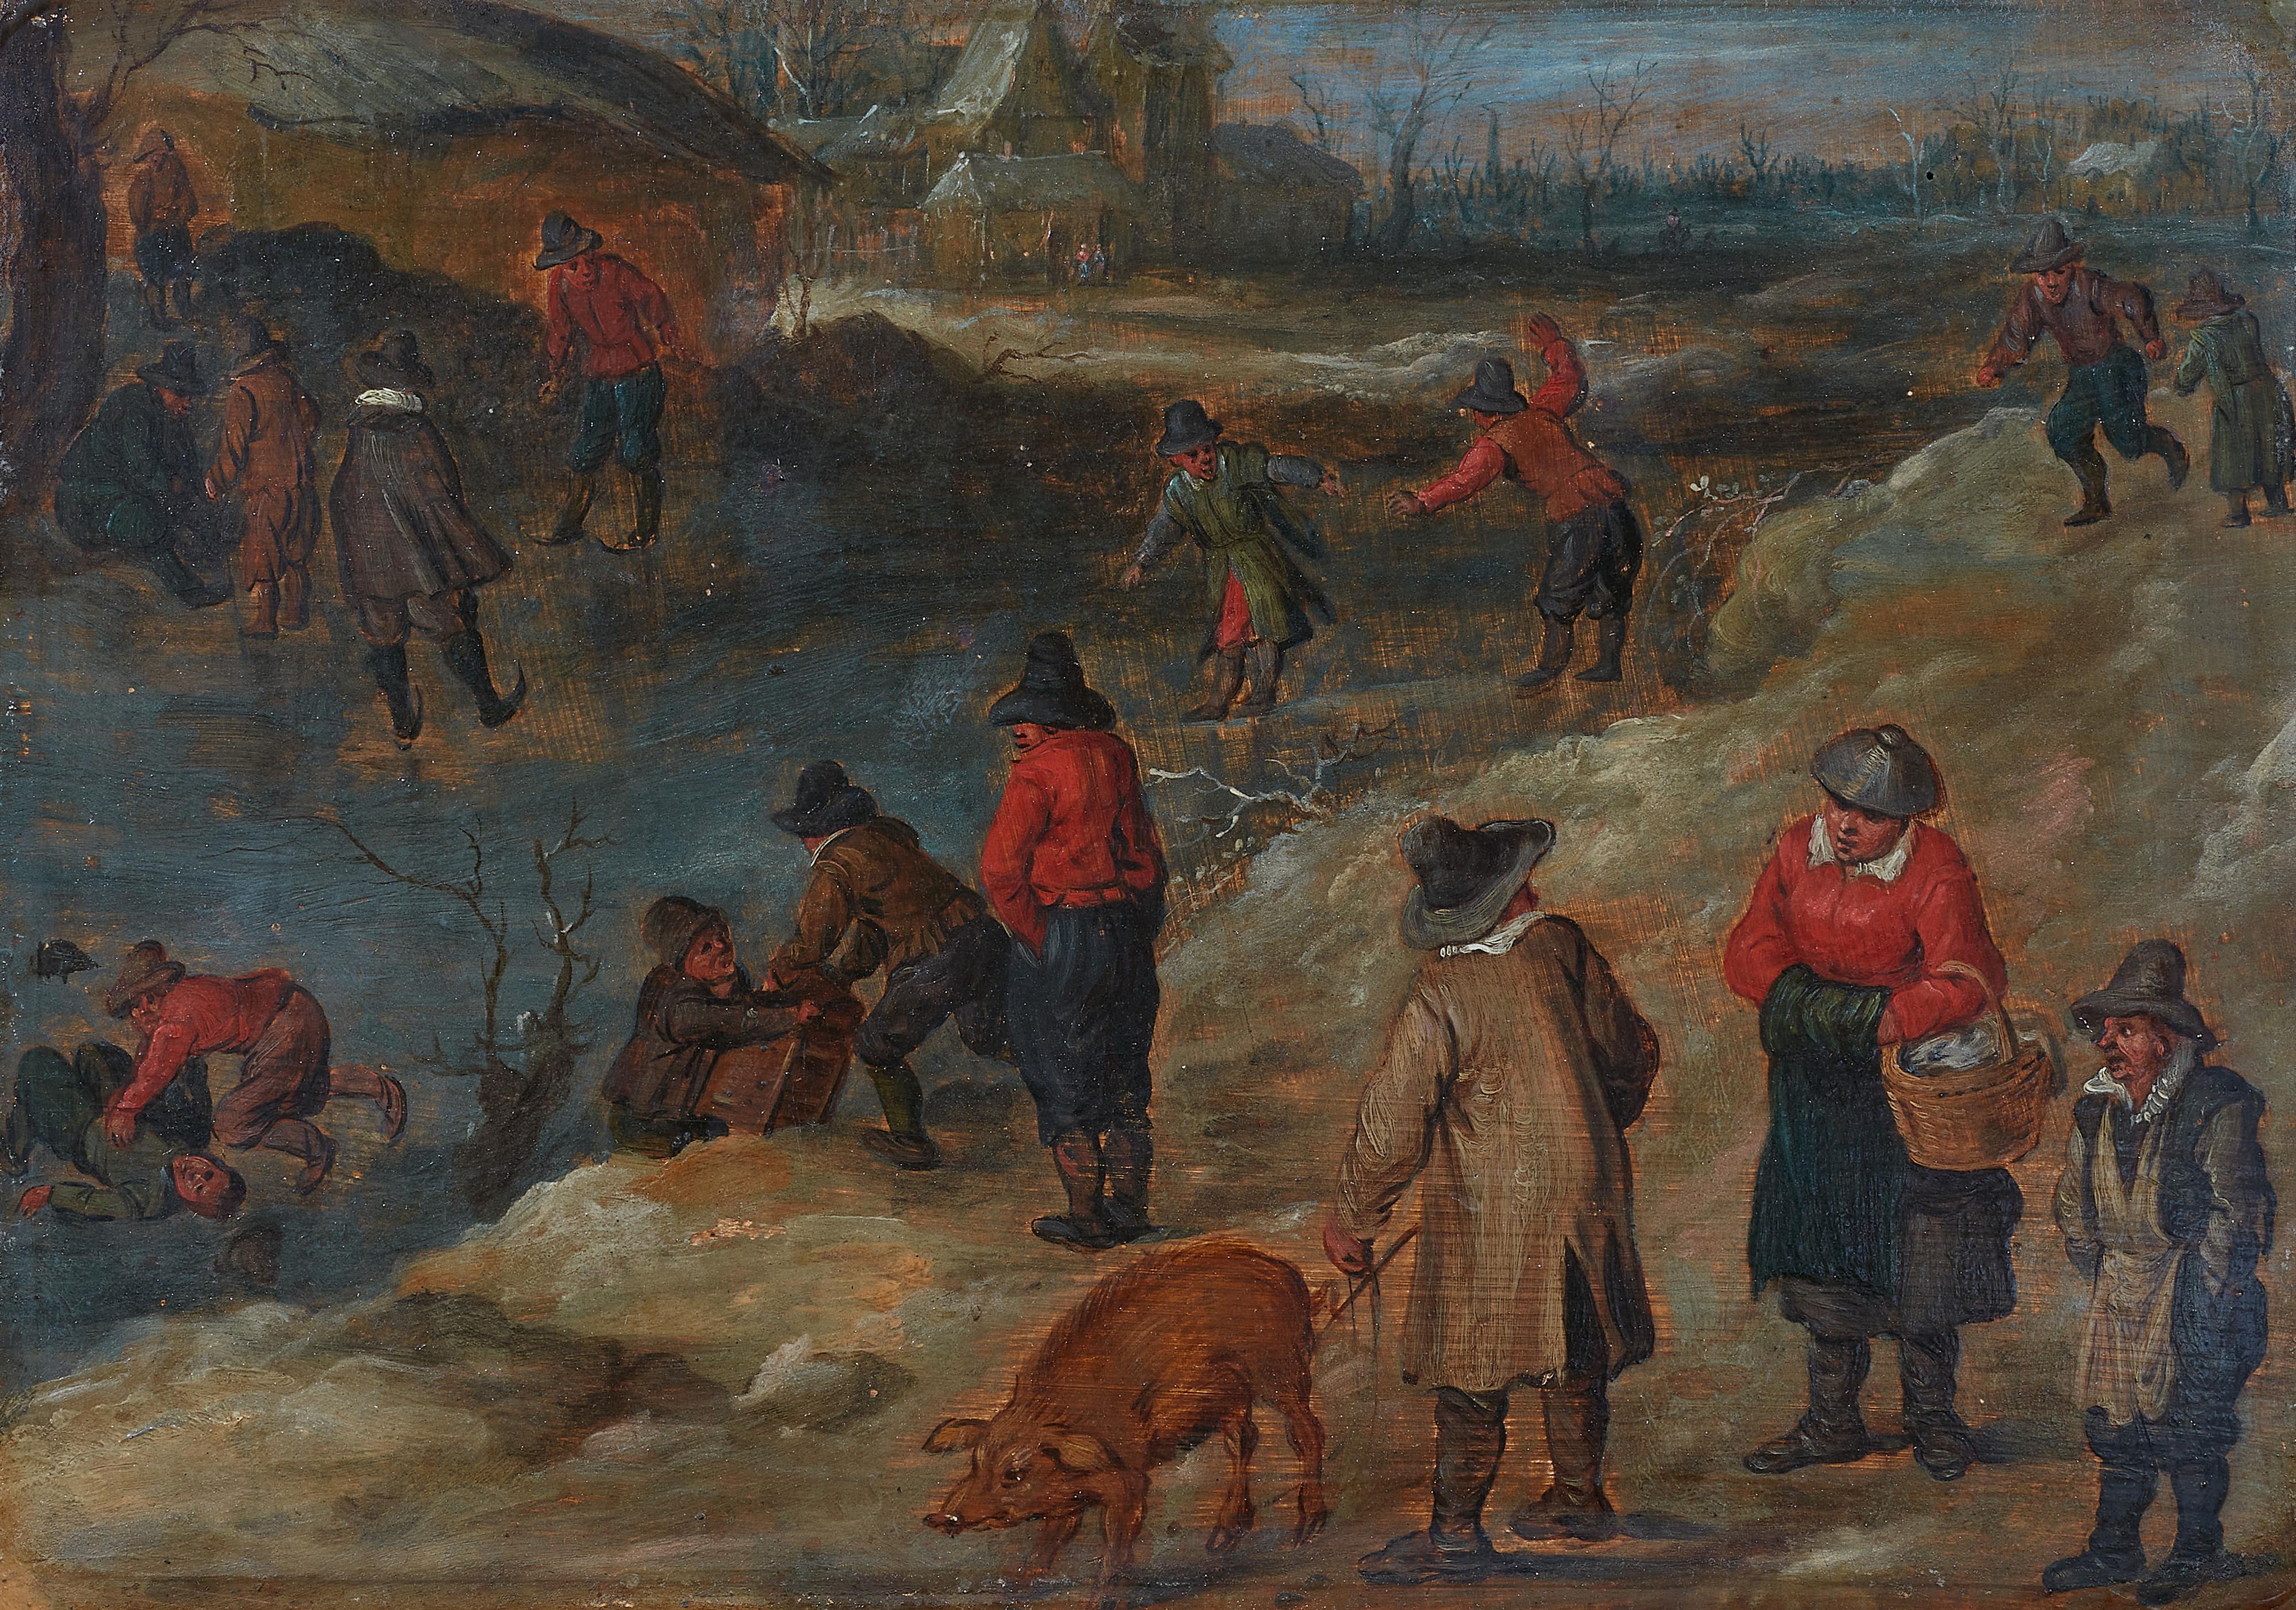 Jan Brueghel the Younger, attributed to - Winter Village Landscape with Skaters - image-1